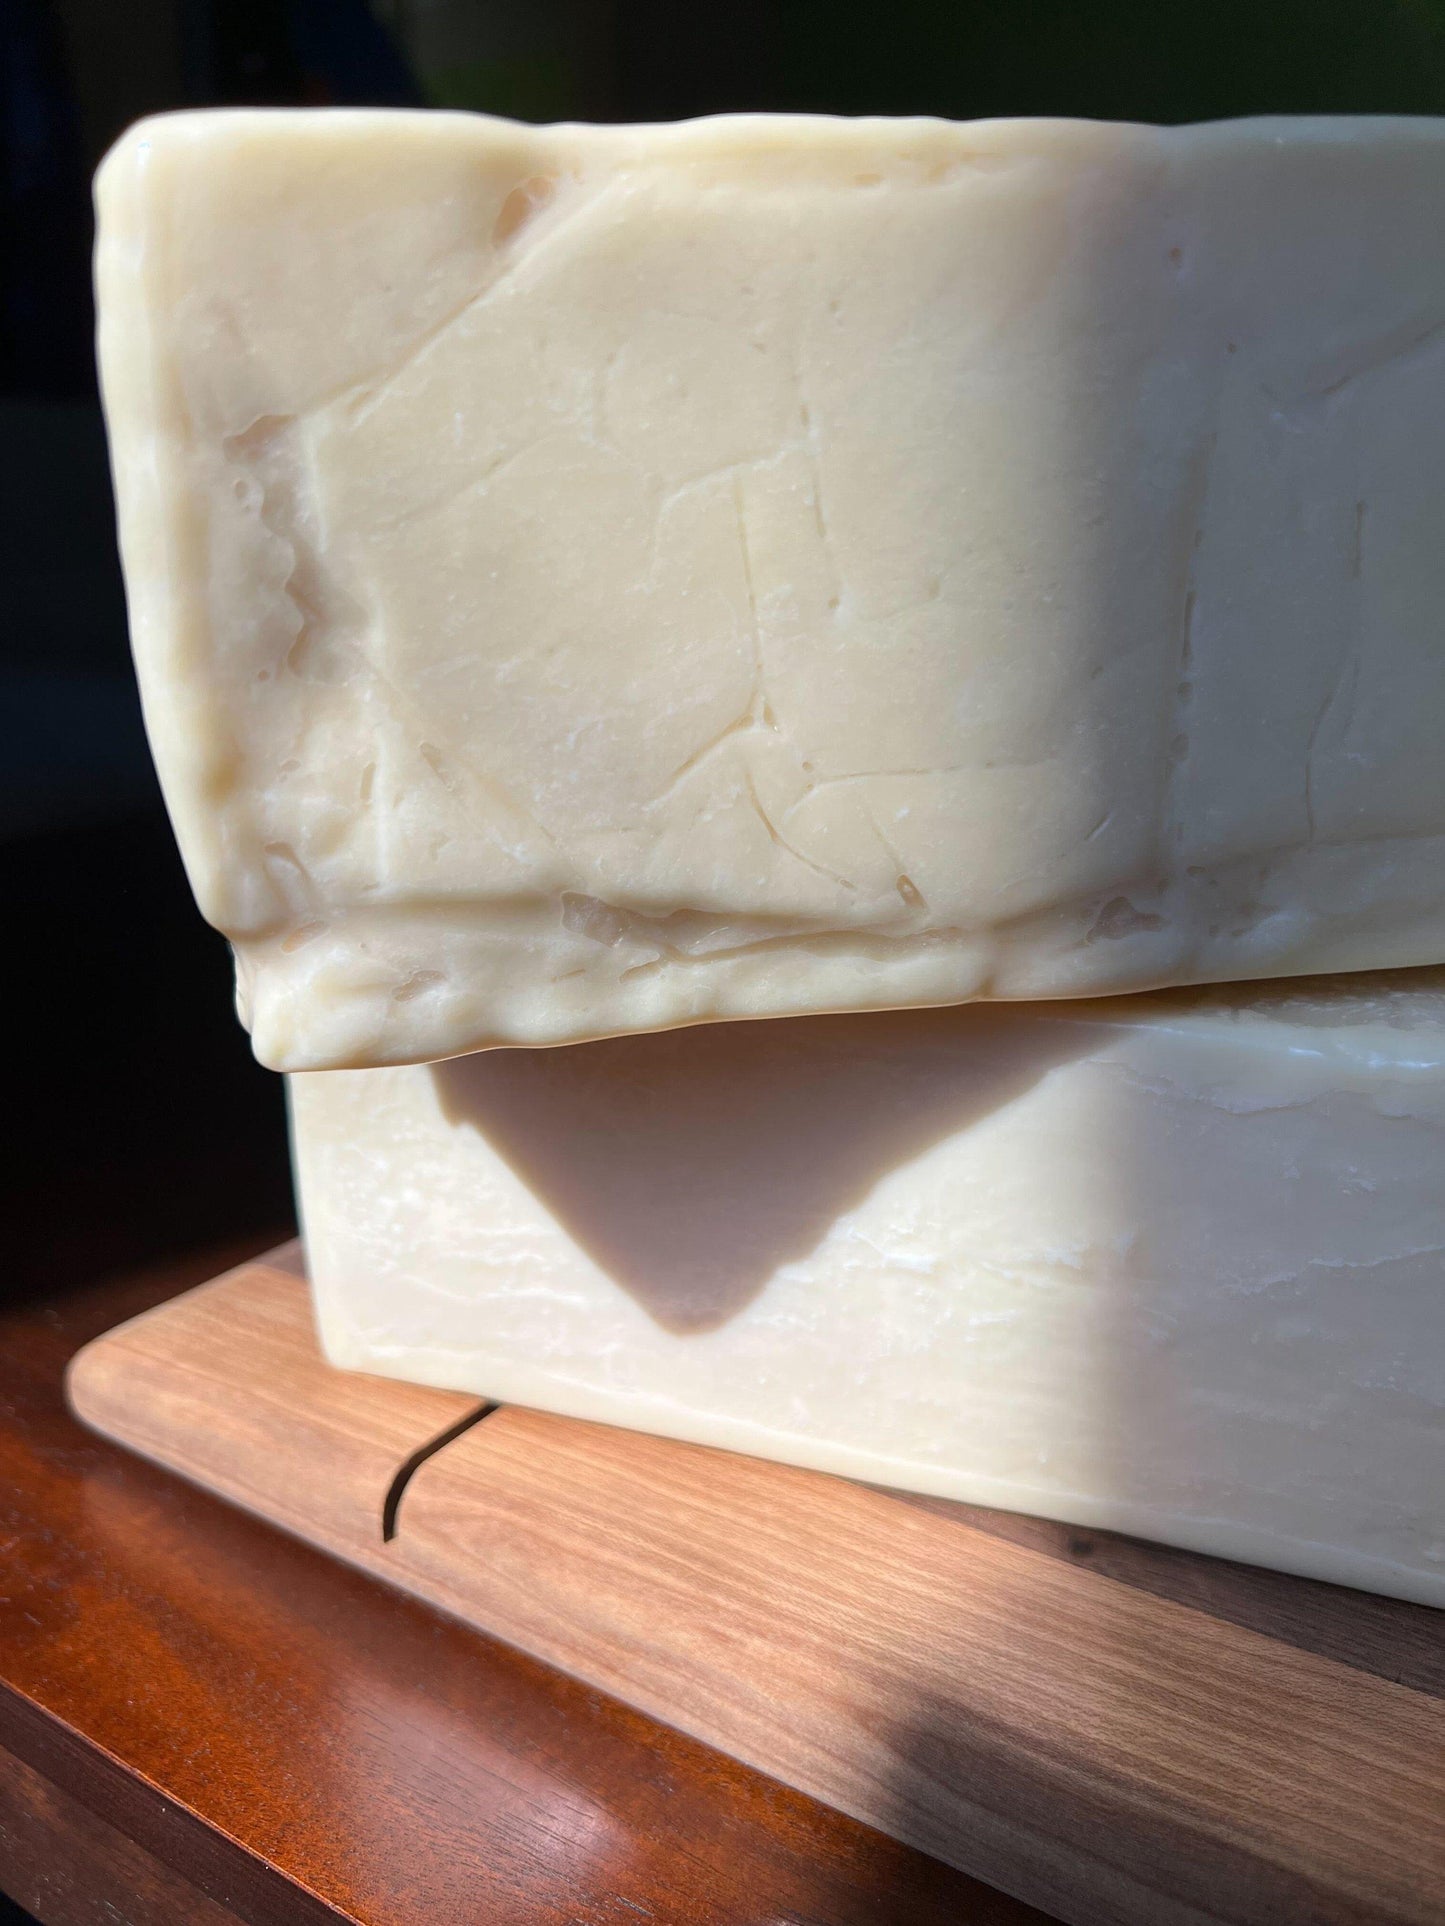 House - Aged White Cheddar, Aged 5 Years